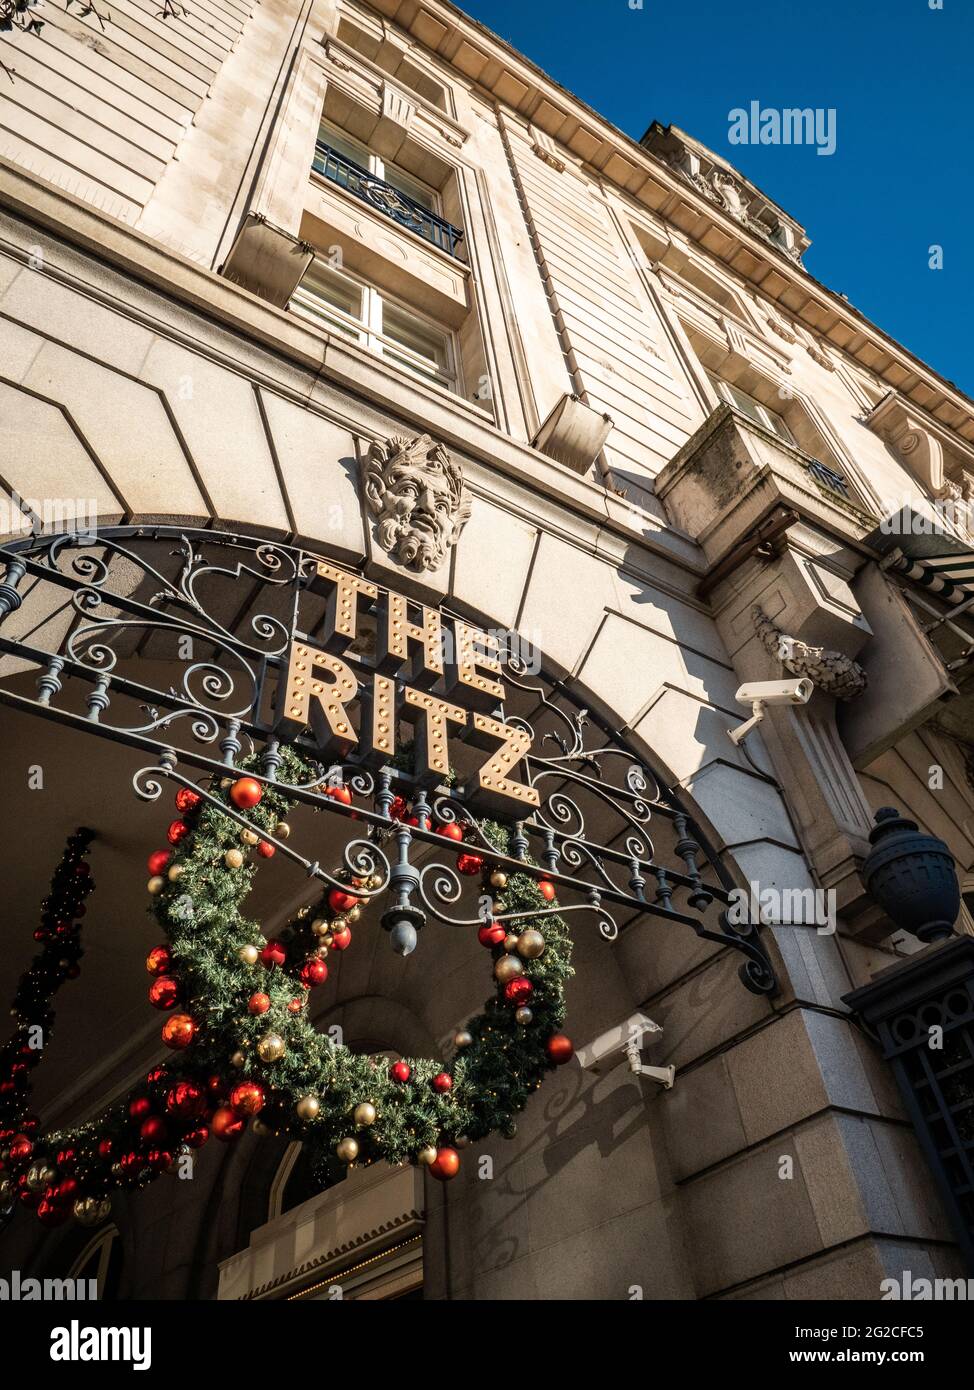 The Ritz Hotel, Mayfair, London. The iconic 5-star grade II listed hotel on Piccadilly which has become a synonymous with high society and luxury. Stock Photo